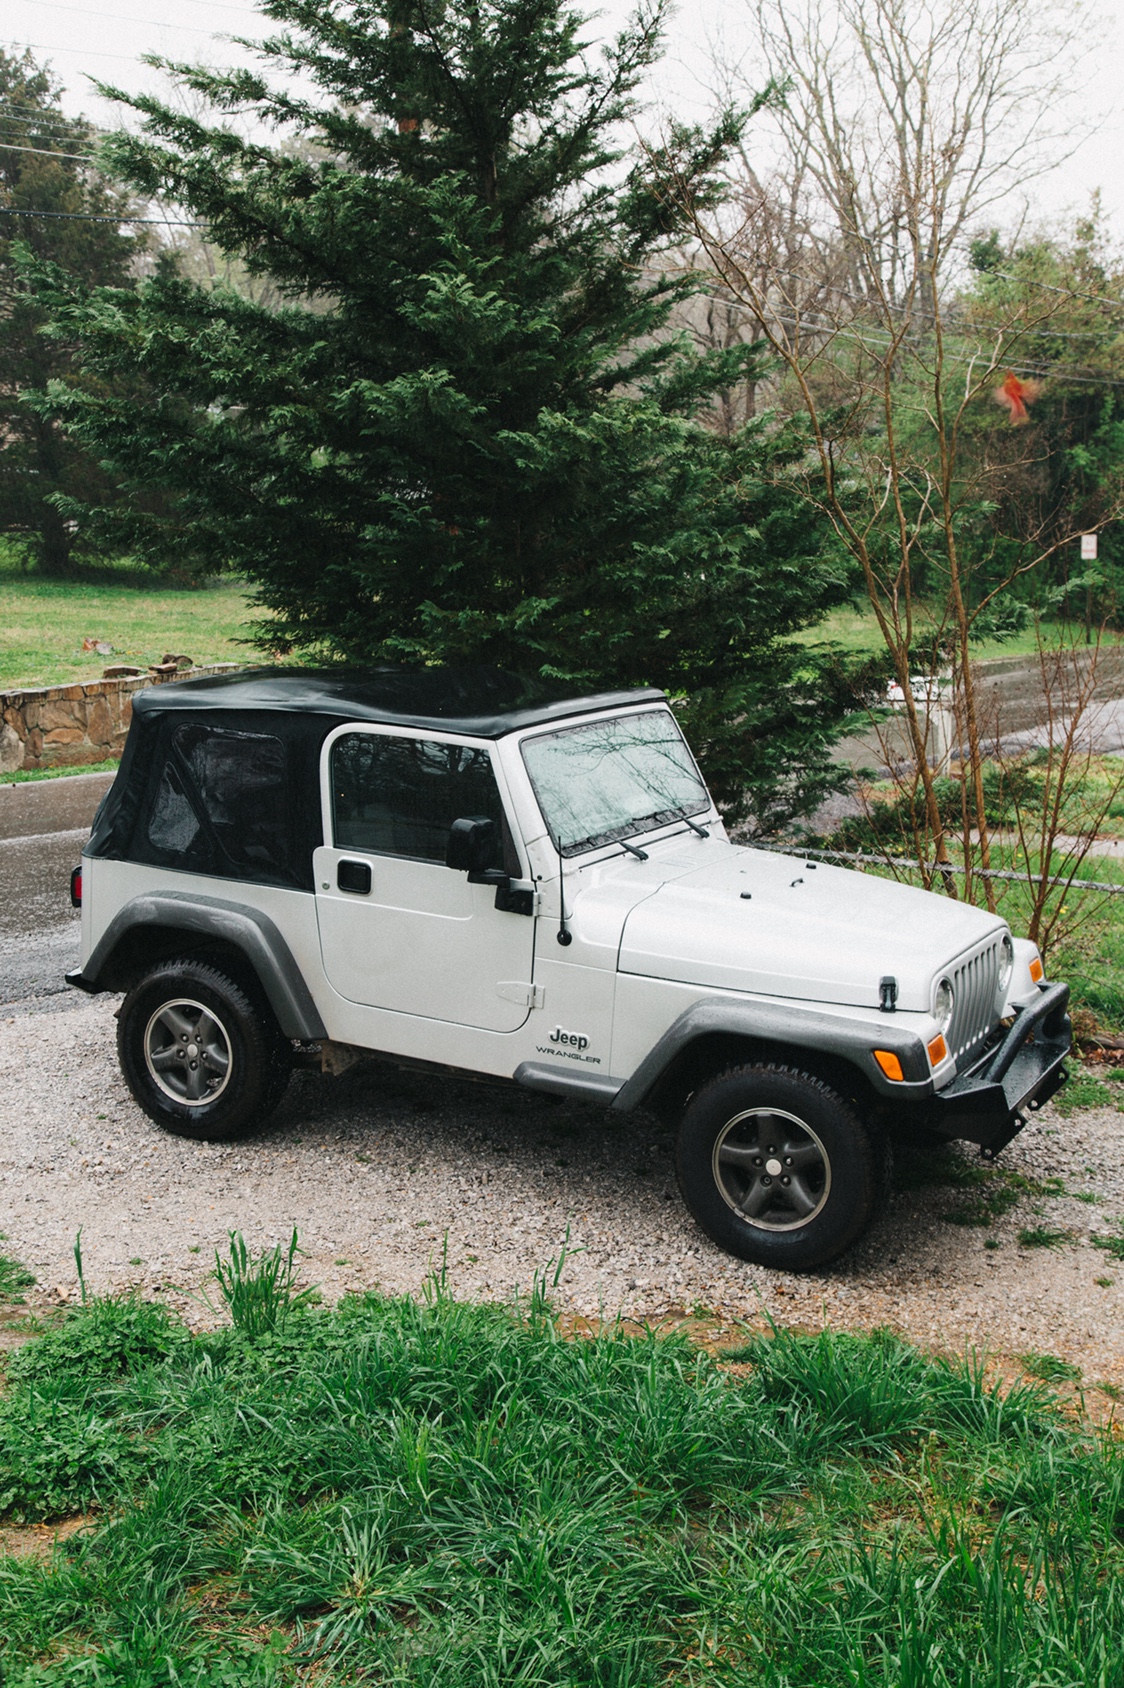 High-Ho Silver” 2004 Jeep Wrangler Columbia Edition Build | OVERLAND BOUND  COMMUNITY